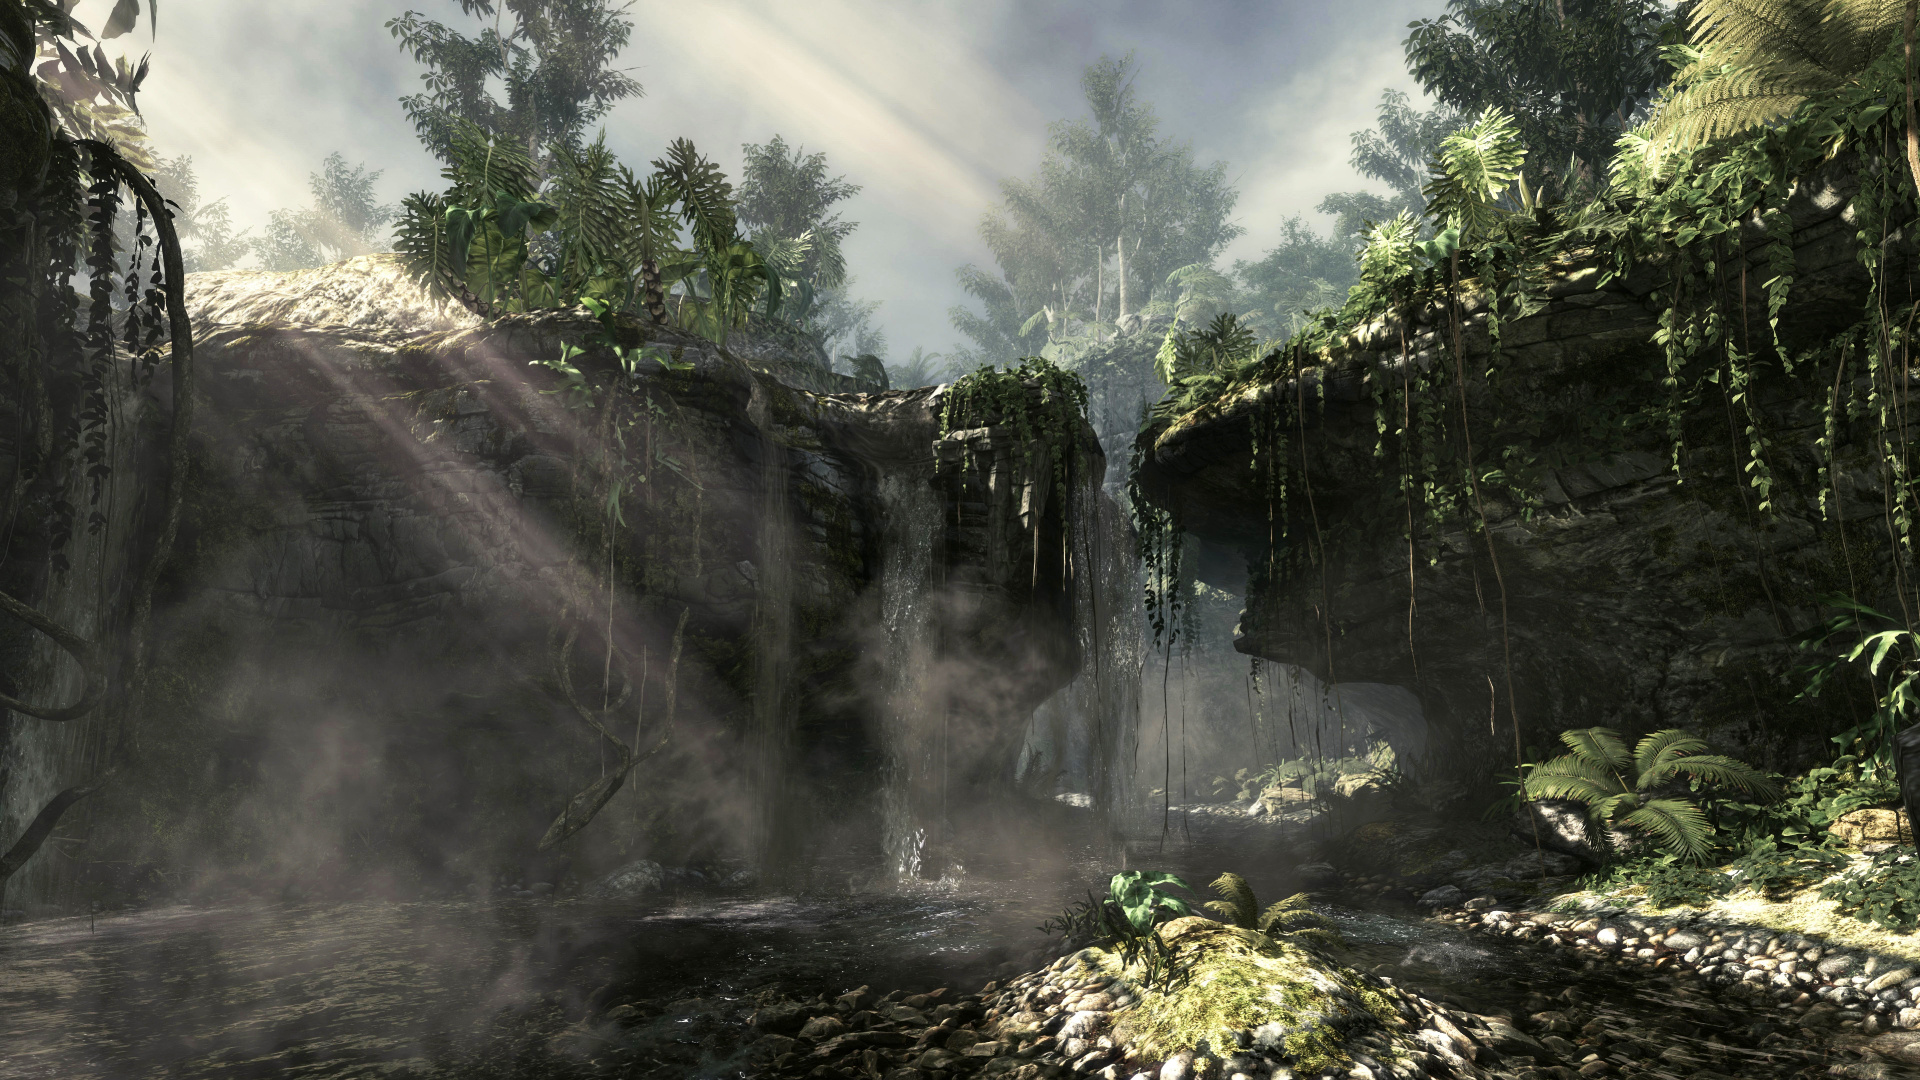 Call of Duty Ghosts, Call of Duty Black Ops Ii, Activision, Infinity Ward, Vegetation. Wallpaper in 1920x1080 Resolution